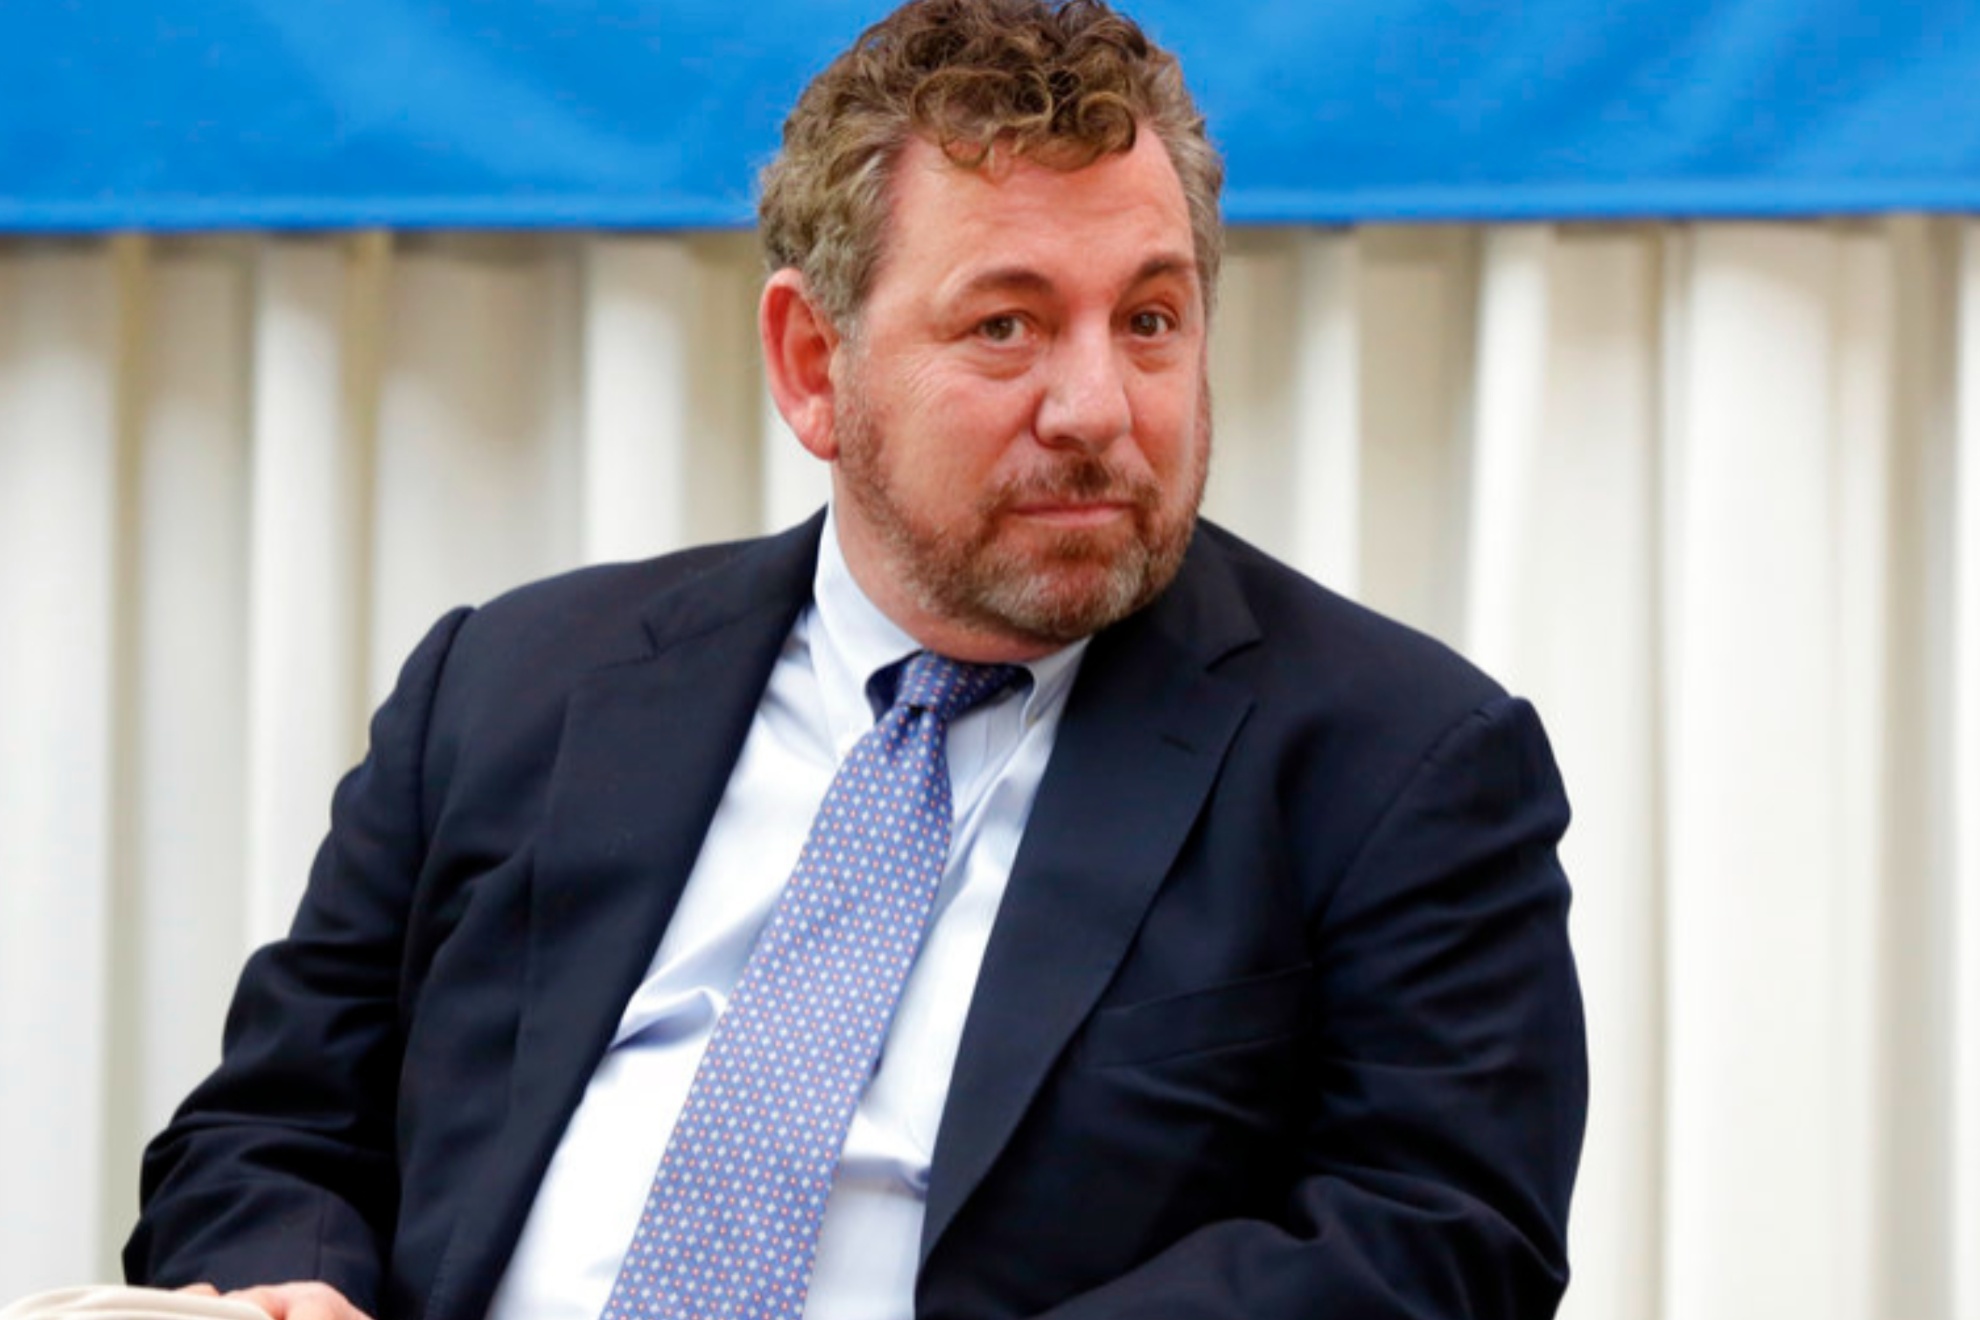 James Dolan is the Chariman and CEO of The Madison Square Garden Company